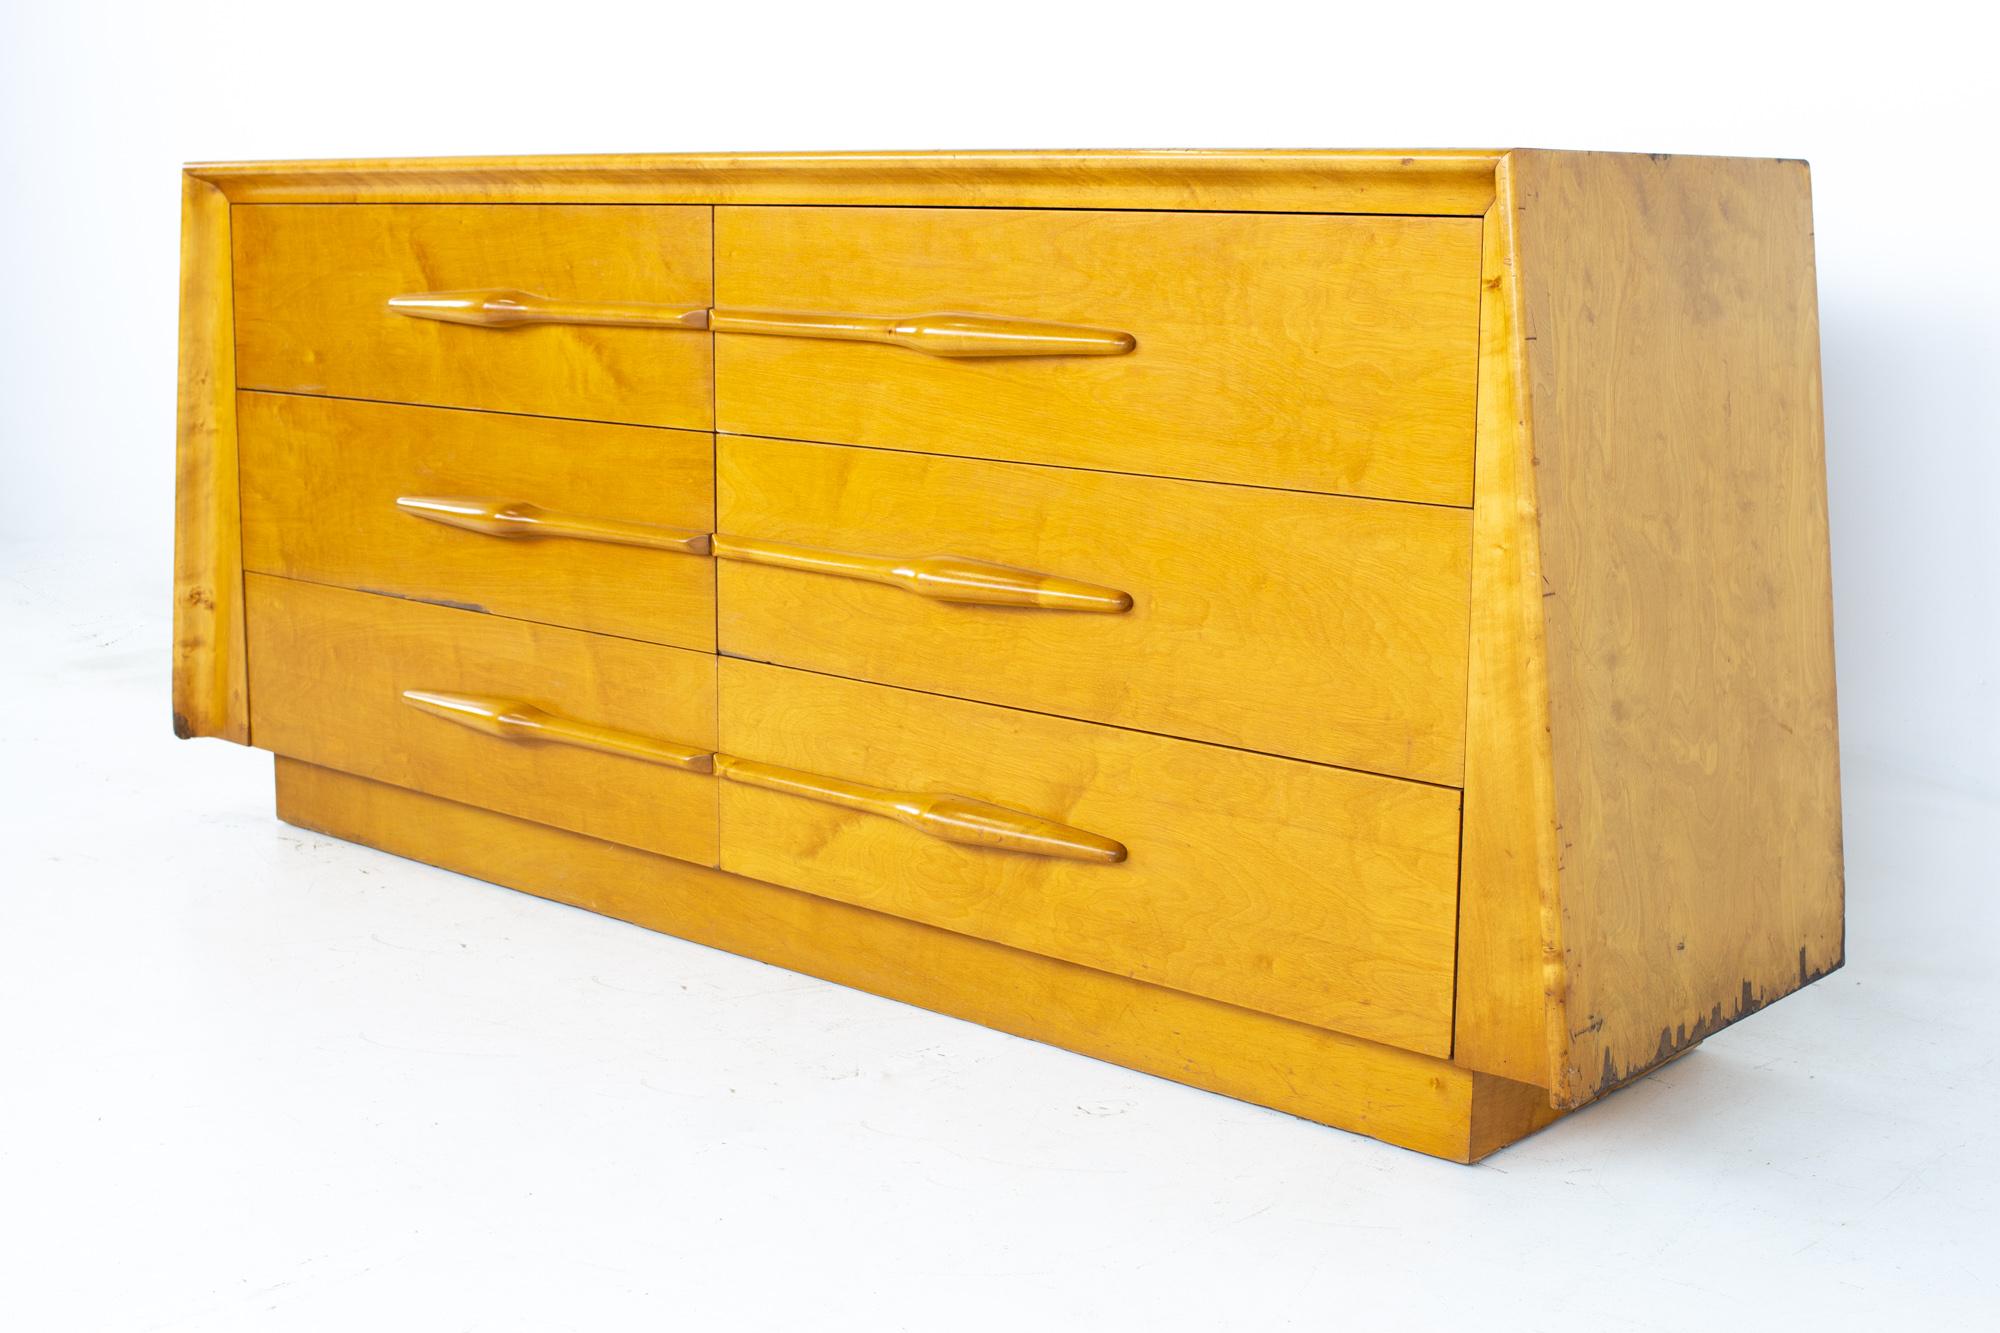 Edmond Spence Mid Century Maple 6 Drawer Lowboy Dresser

Dresser measures: 80 wide x 20.5 deep x 23.25 inches high

All pieces of furniture can be had in what we call restored vintage condition. That means the piece is restored upon purchase so it’s